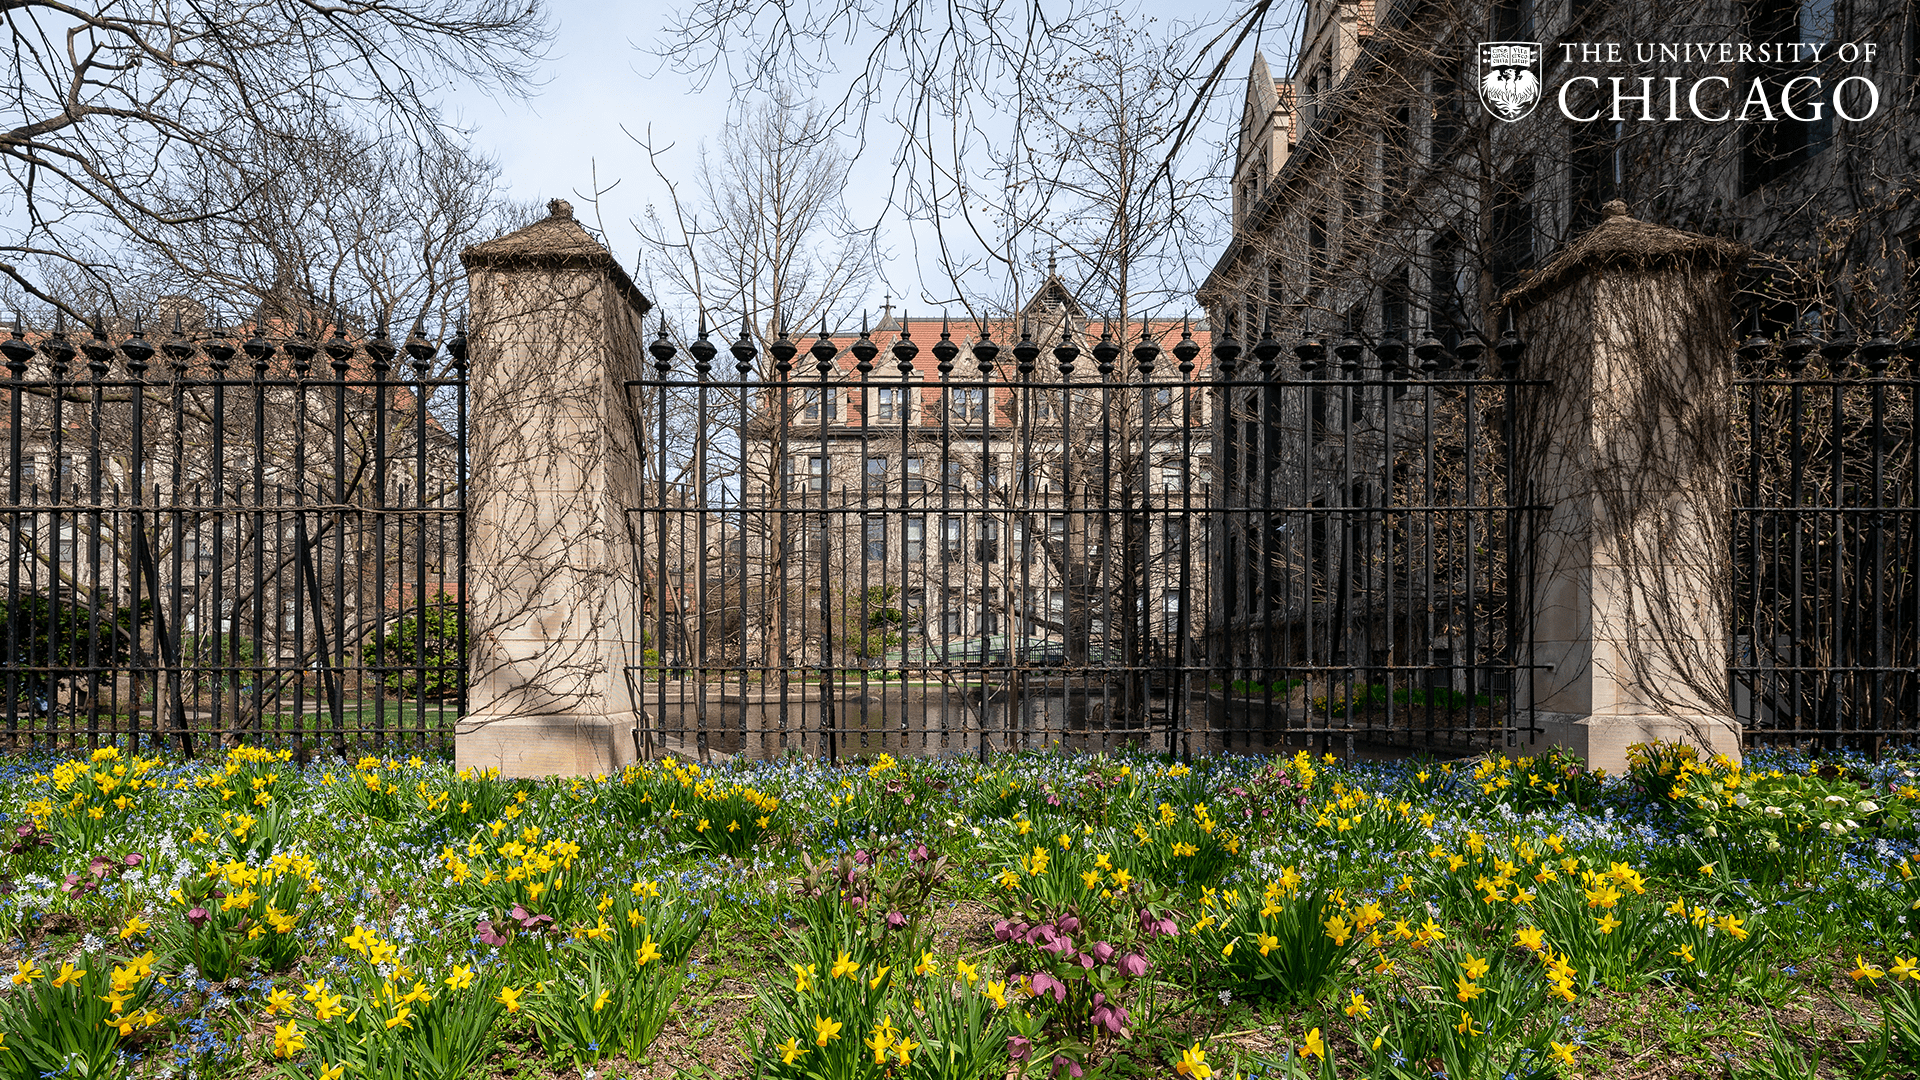 Blooming flower bed in front of a fence